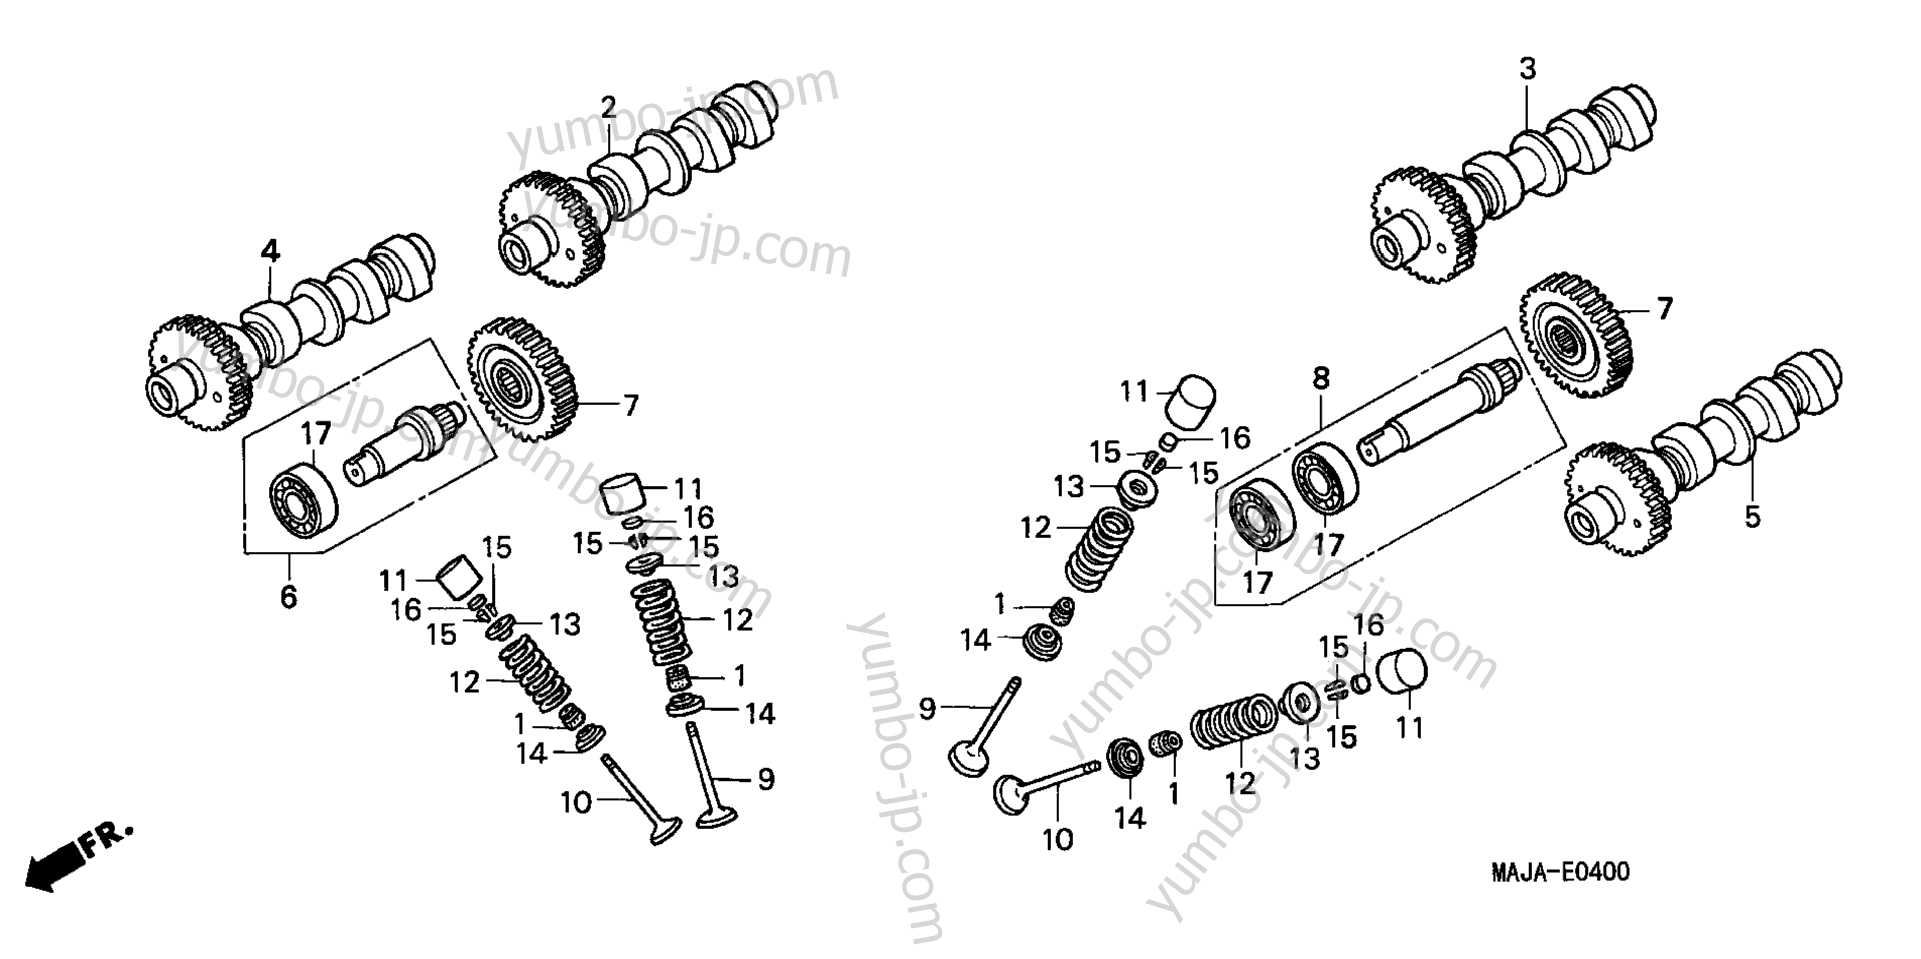 CAMSHAFT / VALVE for motorcycles HONDA ST1100A A 2002 year